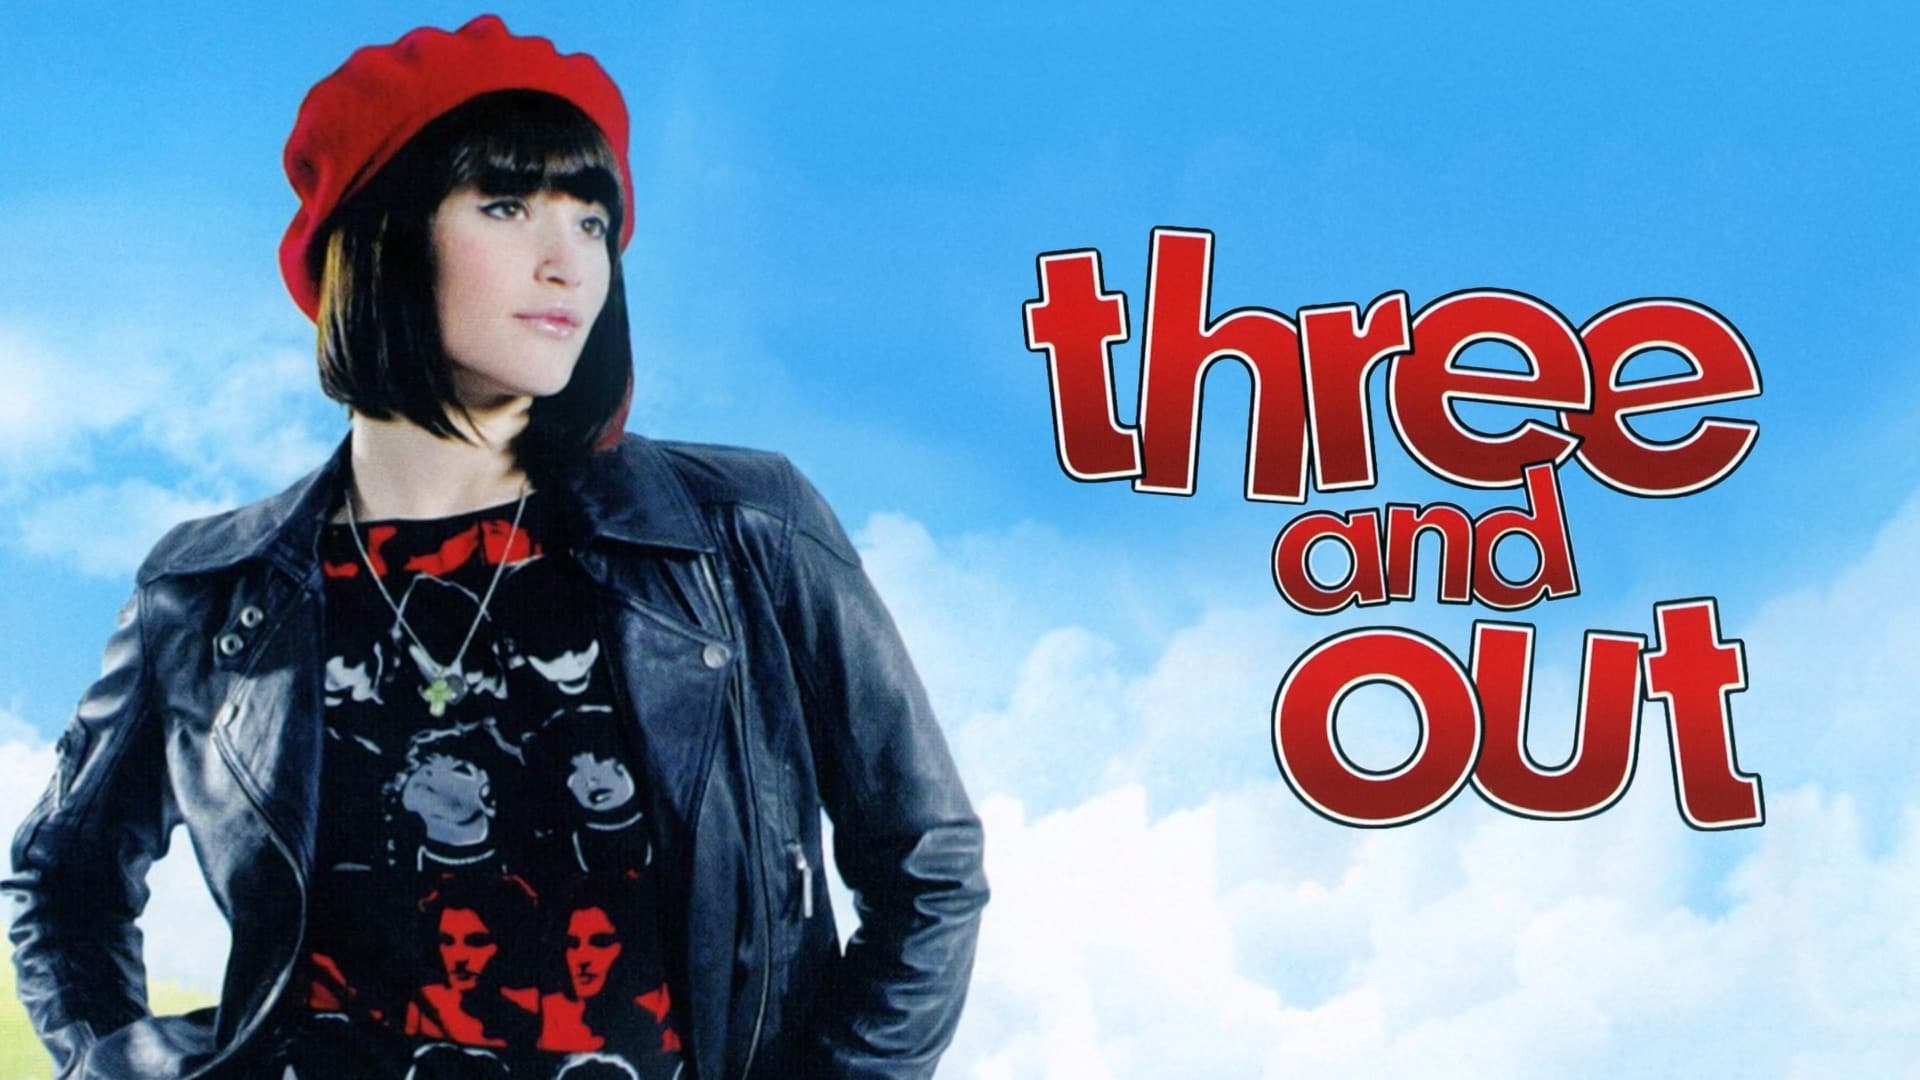 Three and Out (2008)